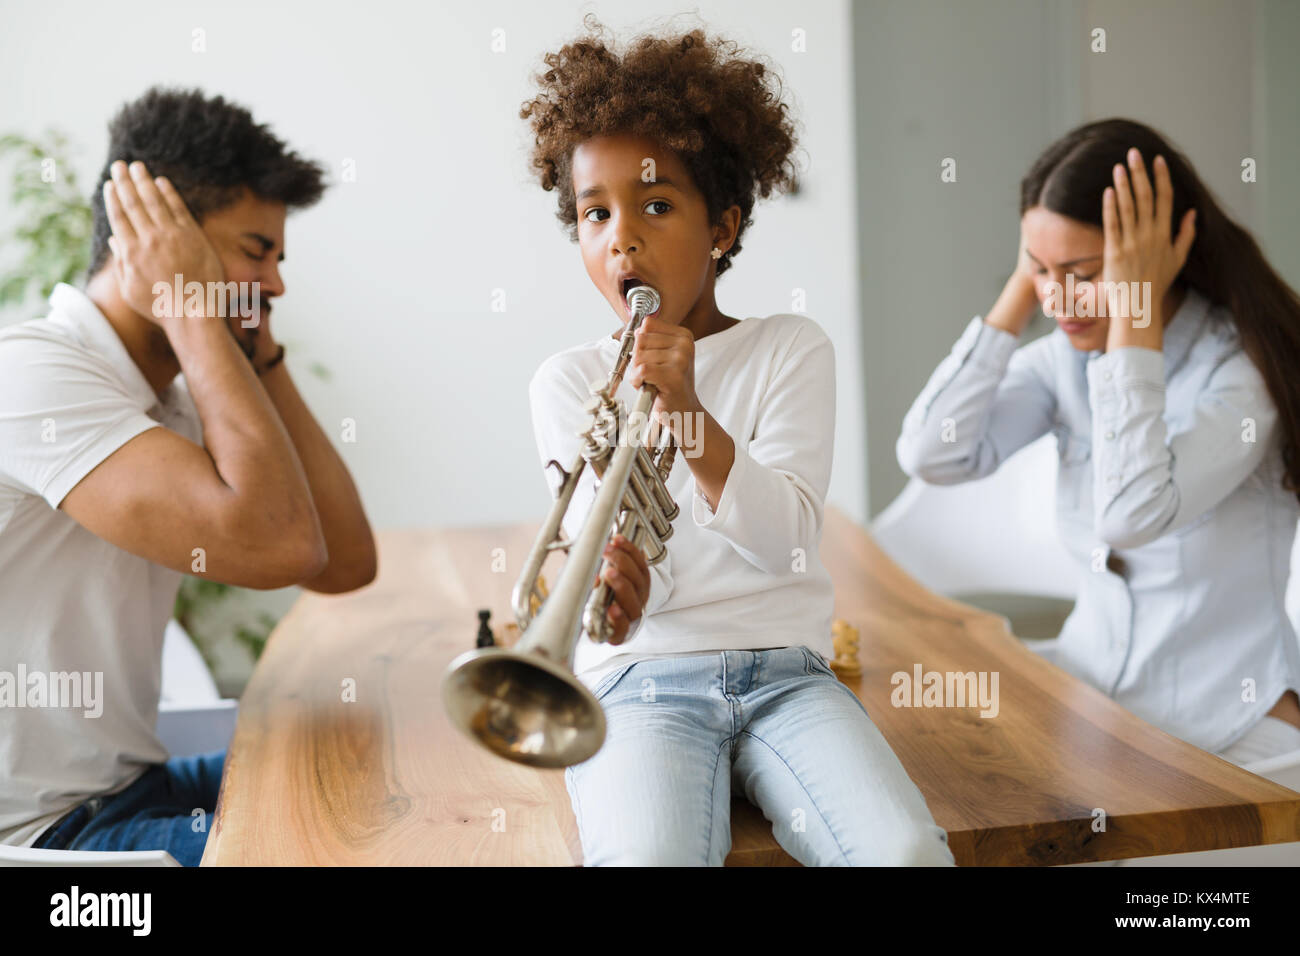 Picture of child making noise by playing trumpet Stock Photo